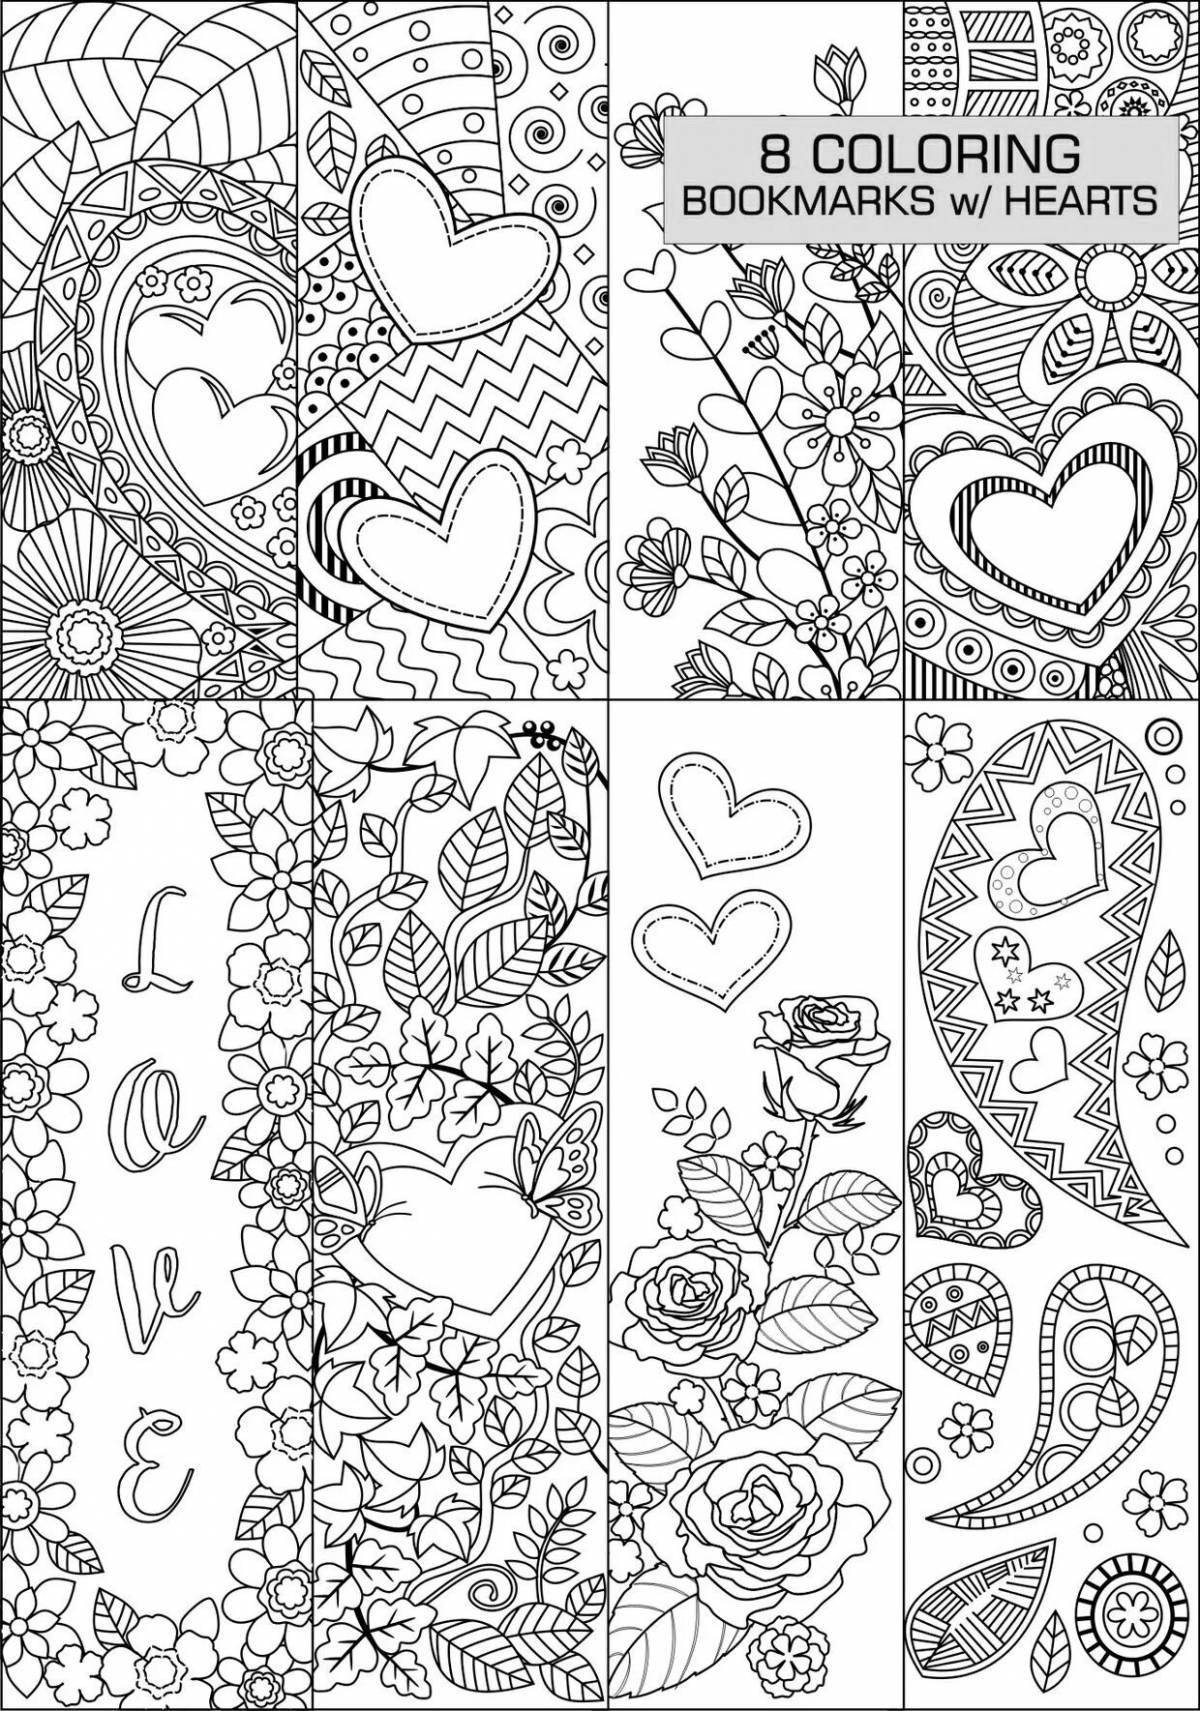 Delightful coloring book for a personal diary